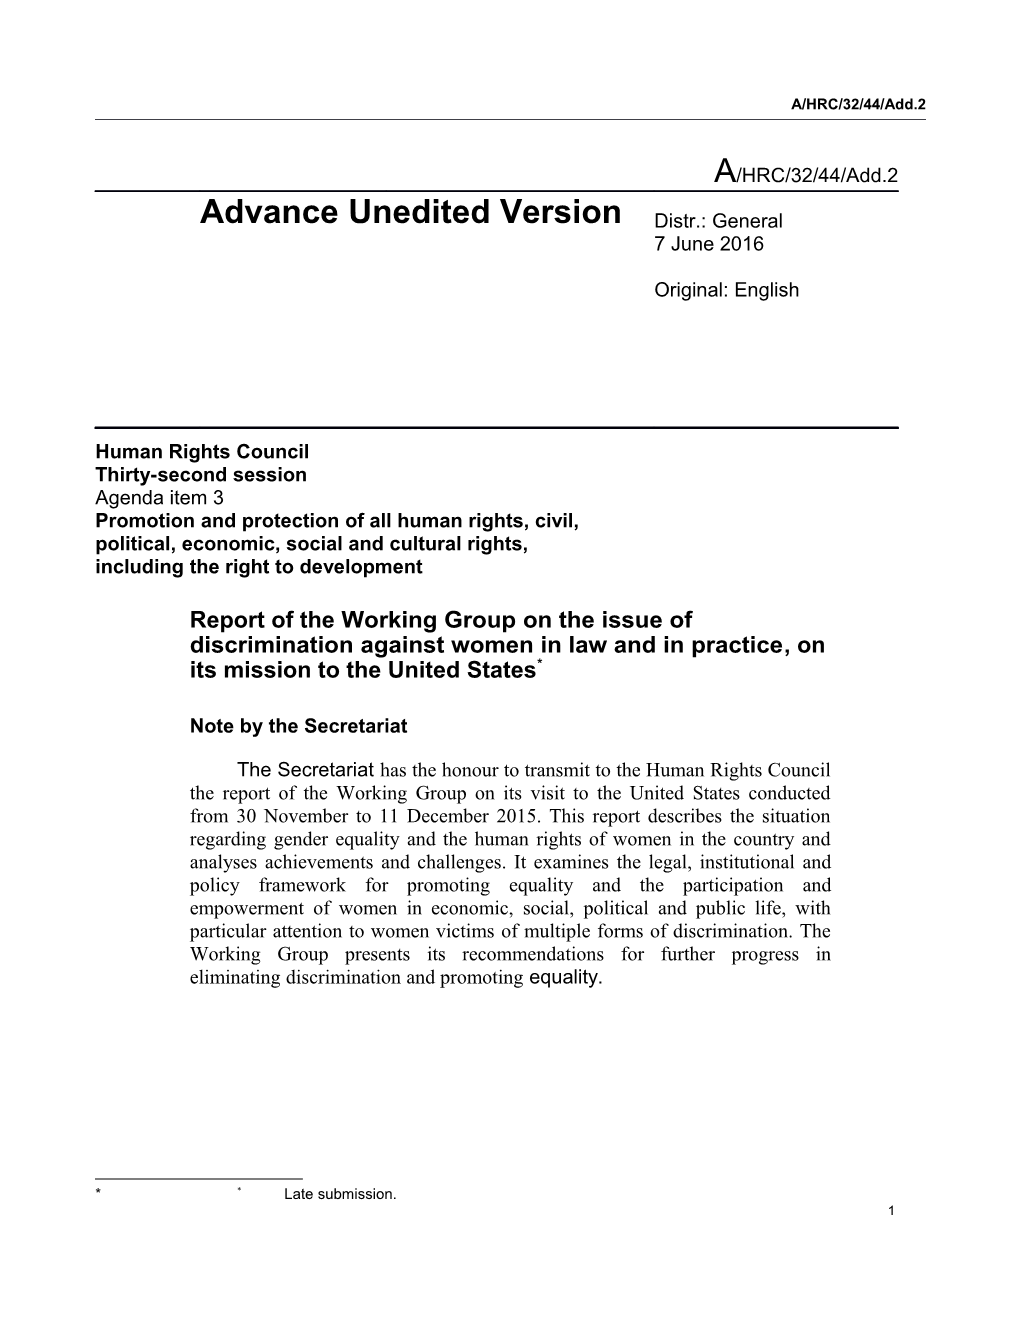 Report of the Special Rapporteur on Report of the Working Group on the Issue of Discrimination